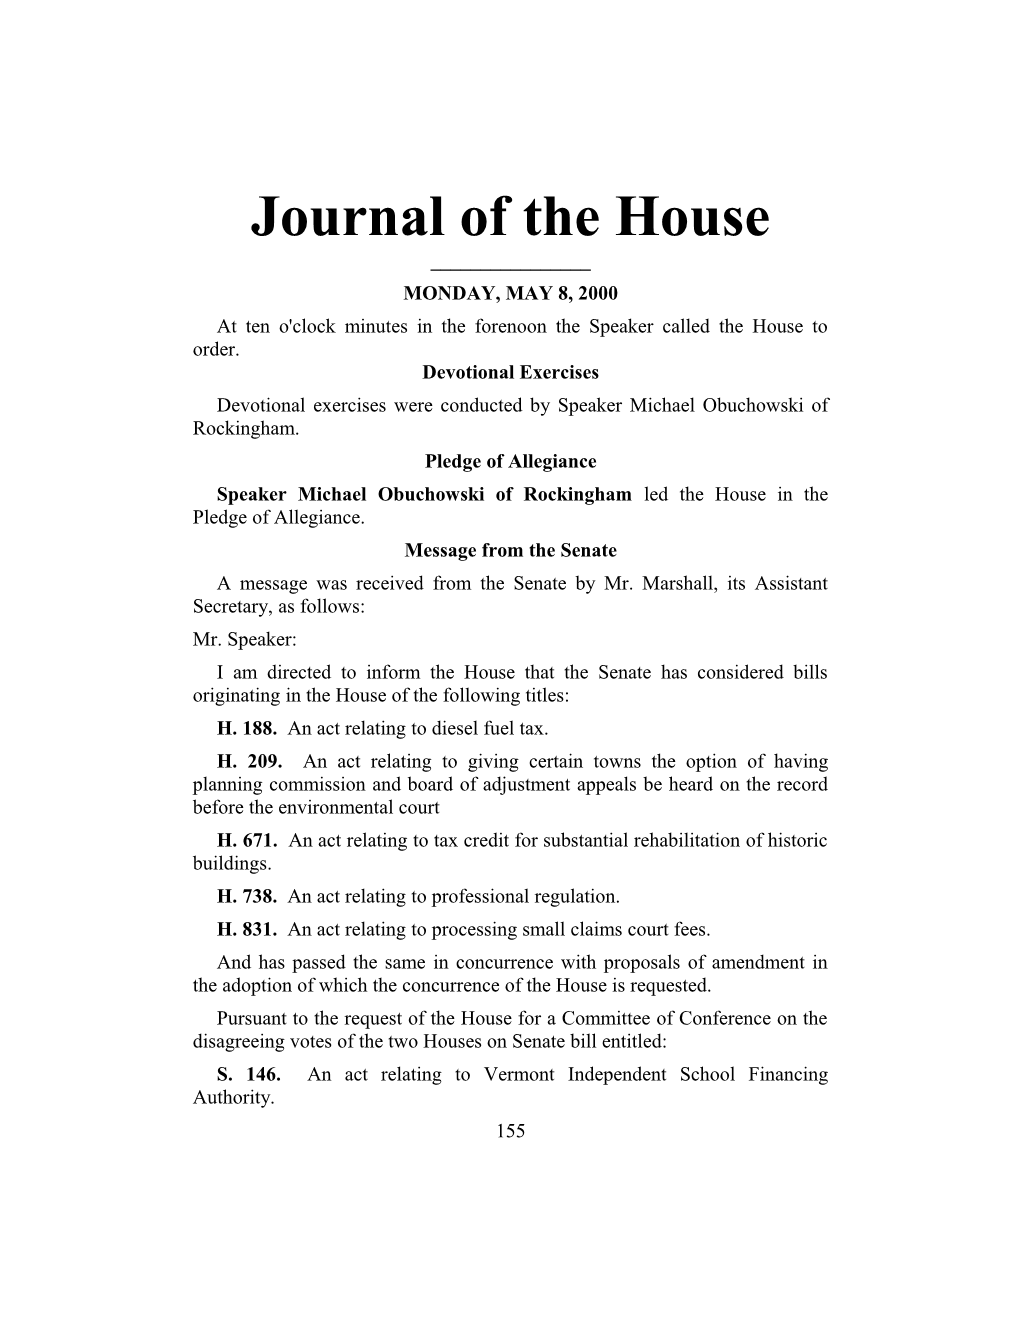 Journal of the House s5